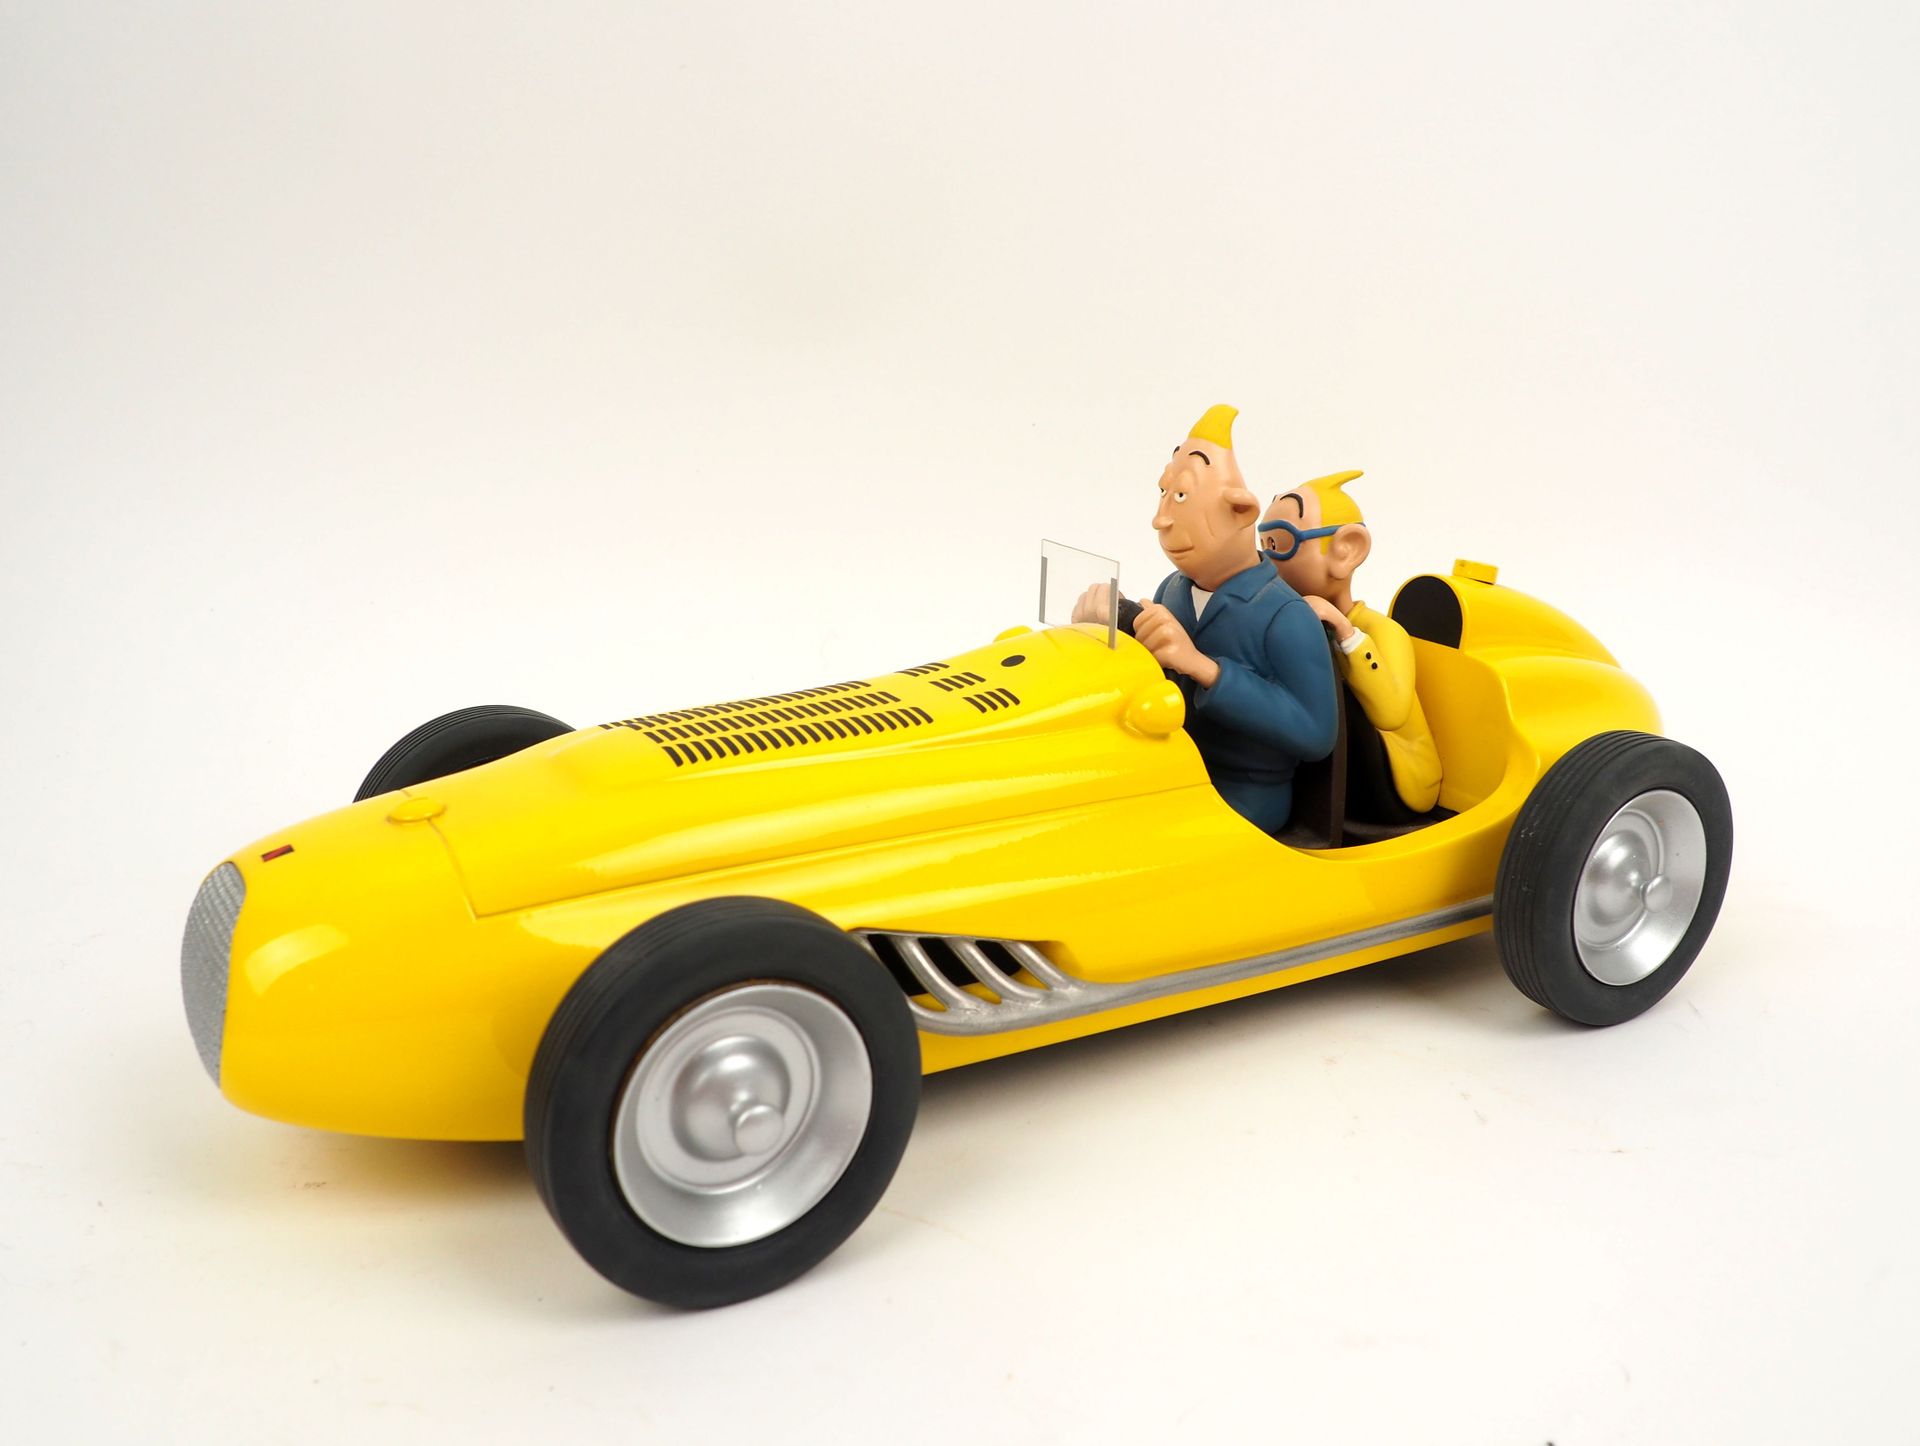 Null FRANQUIN
Spirou and Fantasio
Turbo race
Vehicle published by Aroutcheff at &hellip;